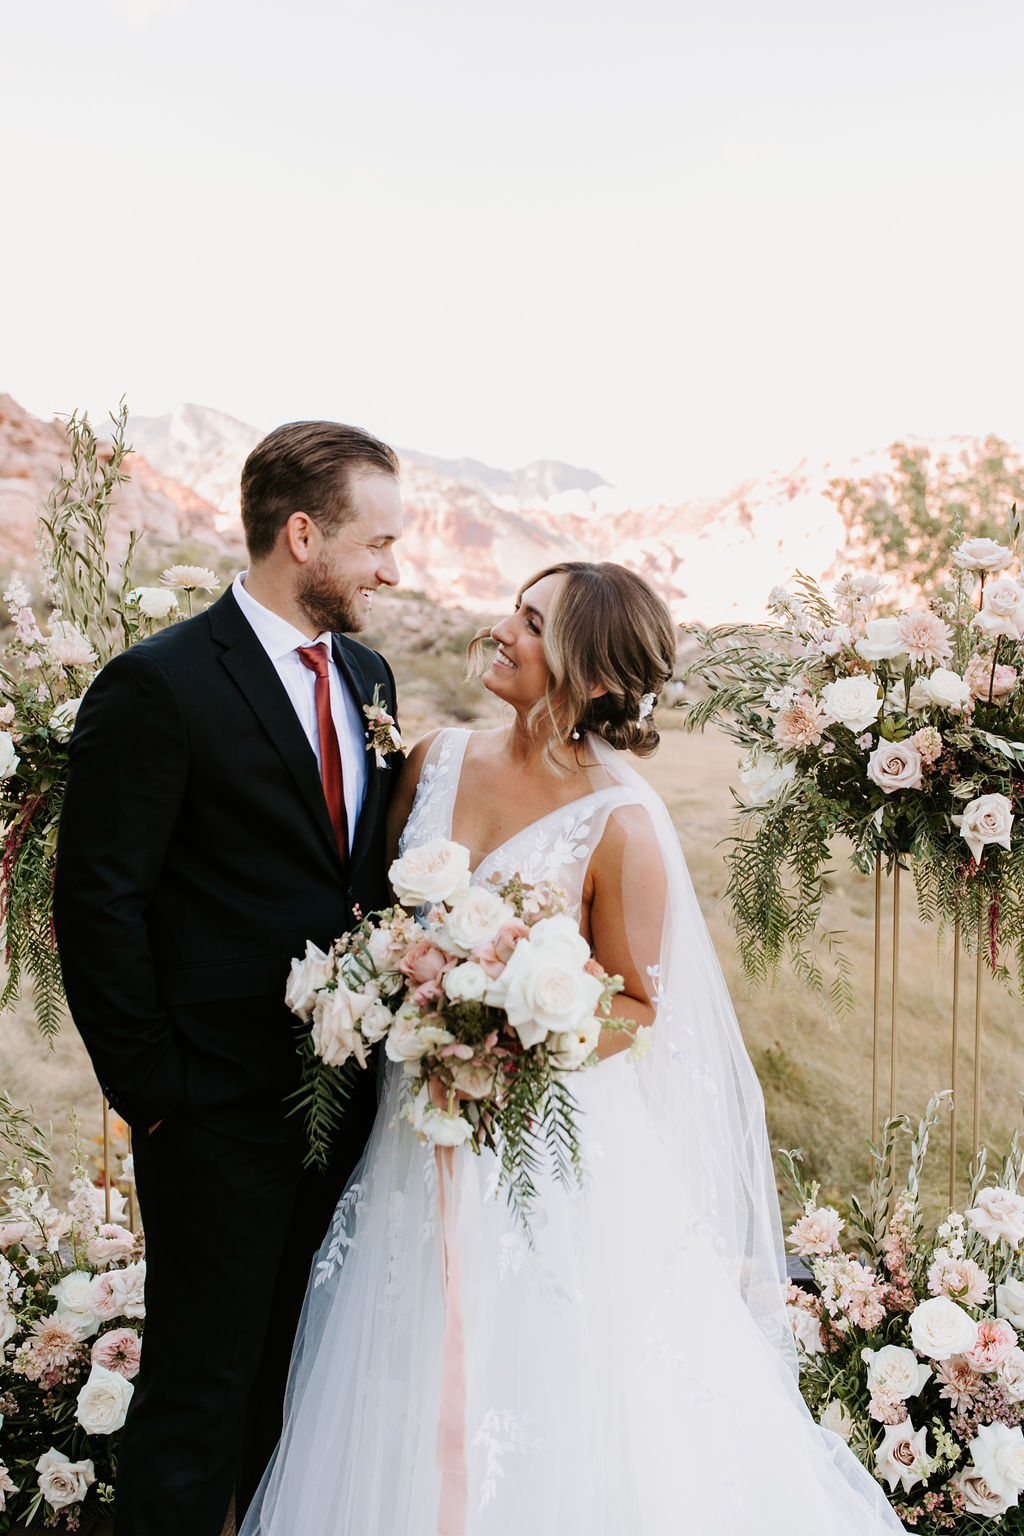 Bride and Groom smiling looking at each other during Romantic Desert & Backyard Micro-Wedding 